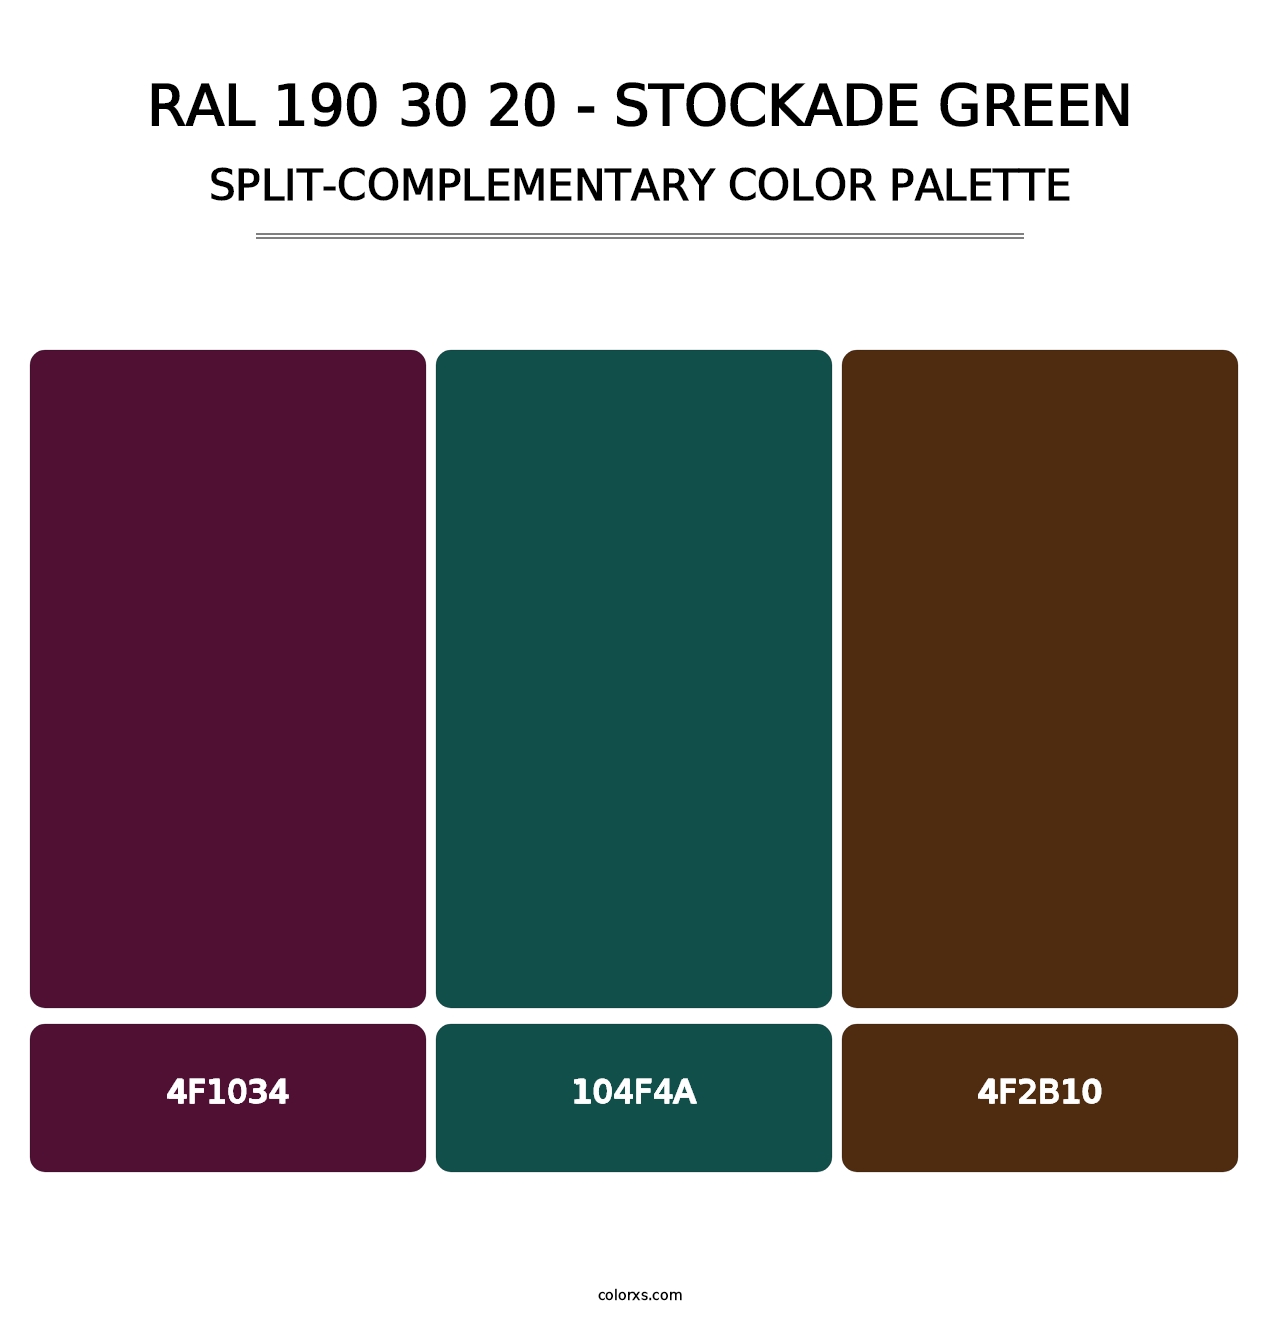 RAL 190 30 20 - Stockade Green - Split-Complementary Color Palette